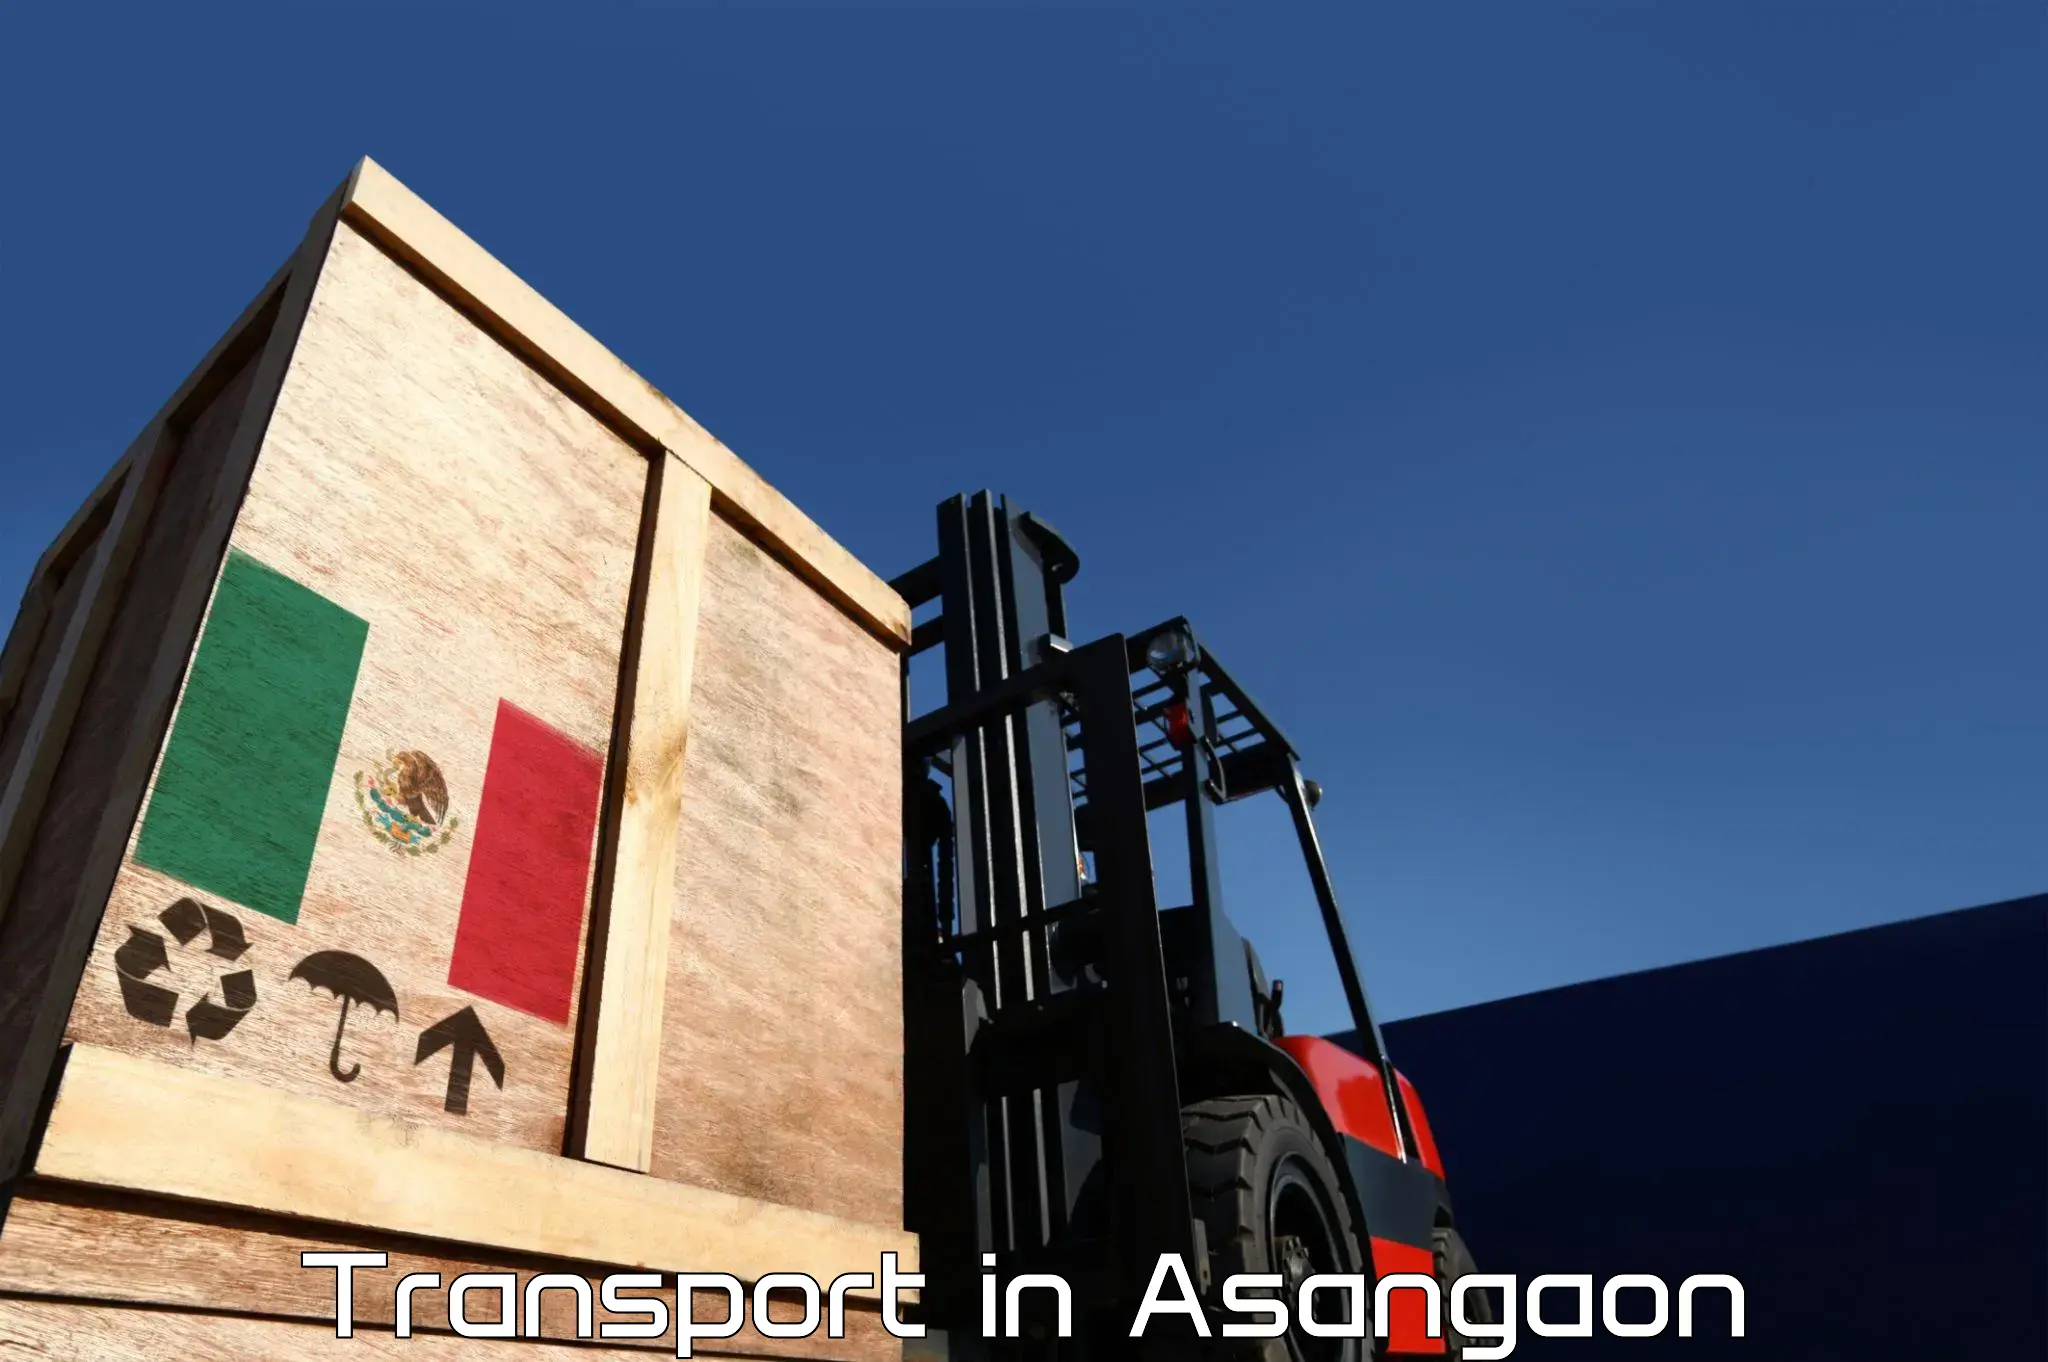 Daily transport service in Asangaon